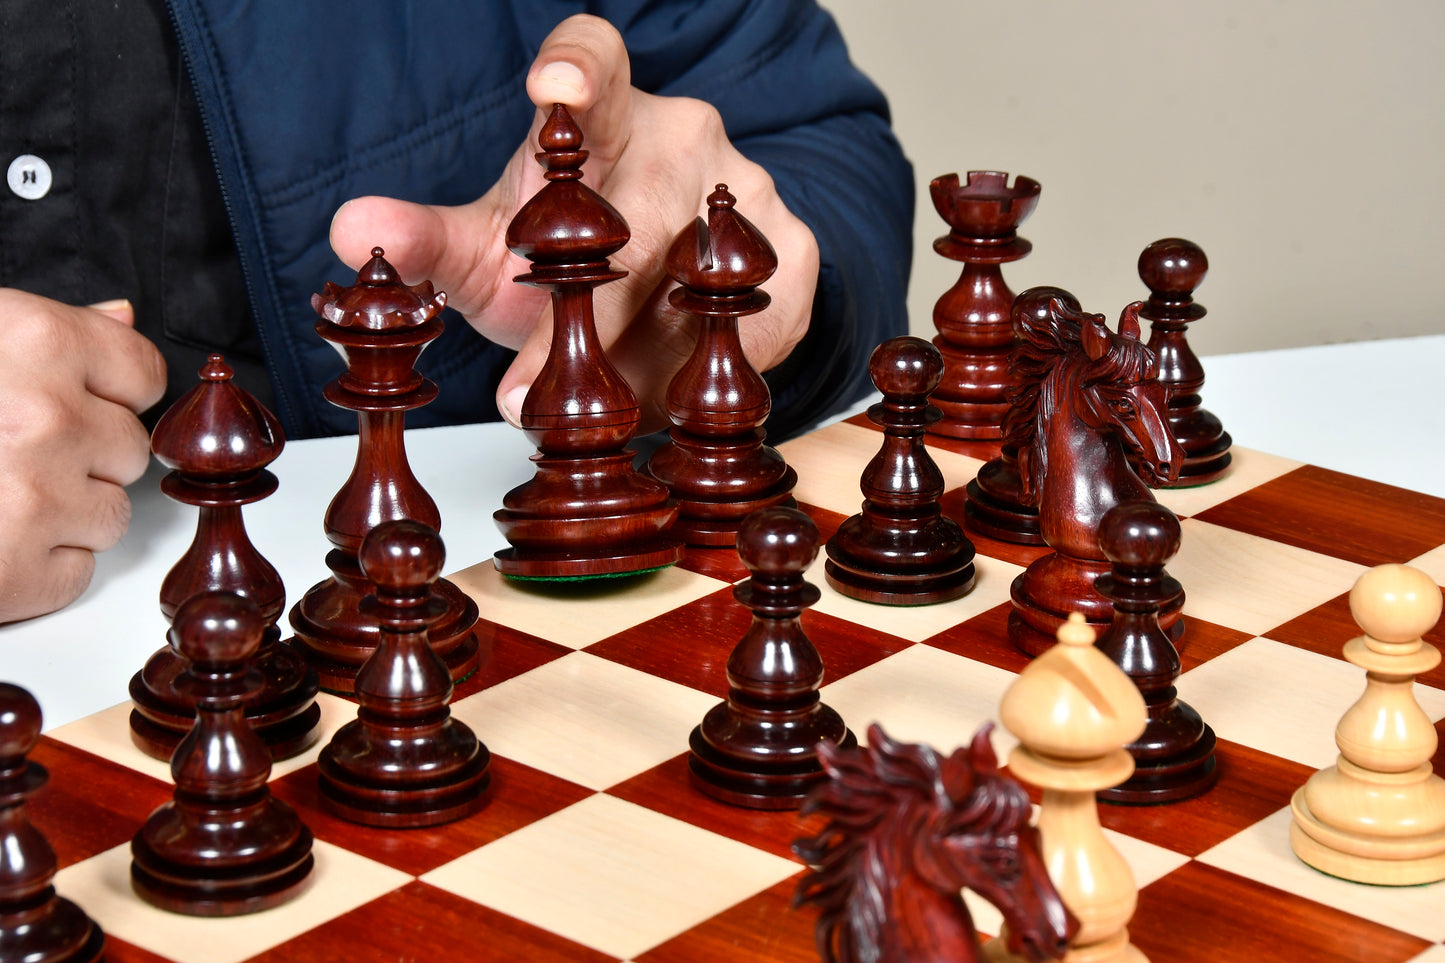 CB Wild Stallion Luxury Chess Pieces in Bud Rosewood & Boxwood - 4.4" King